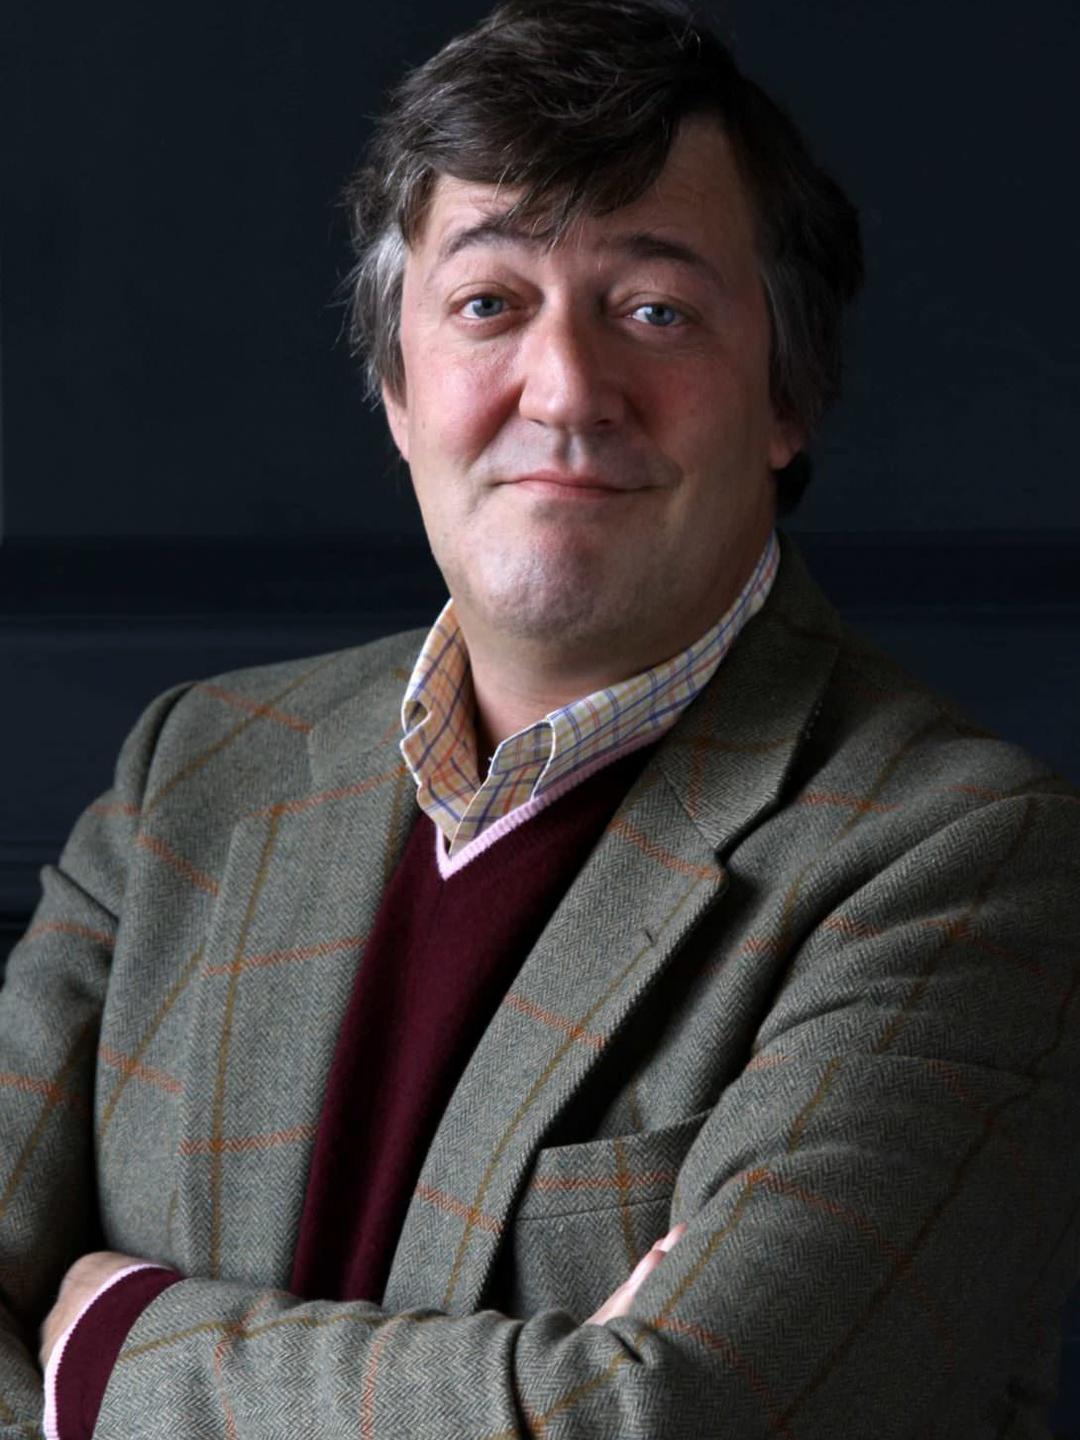 Stephen Fry young pics